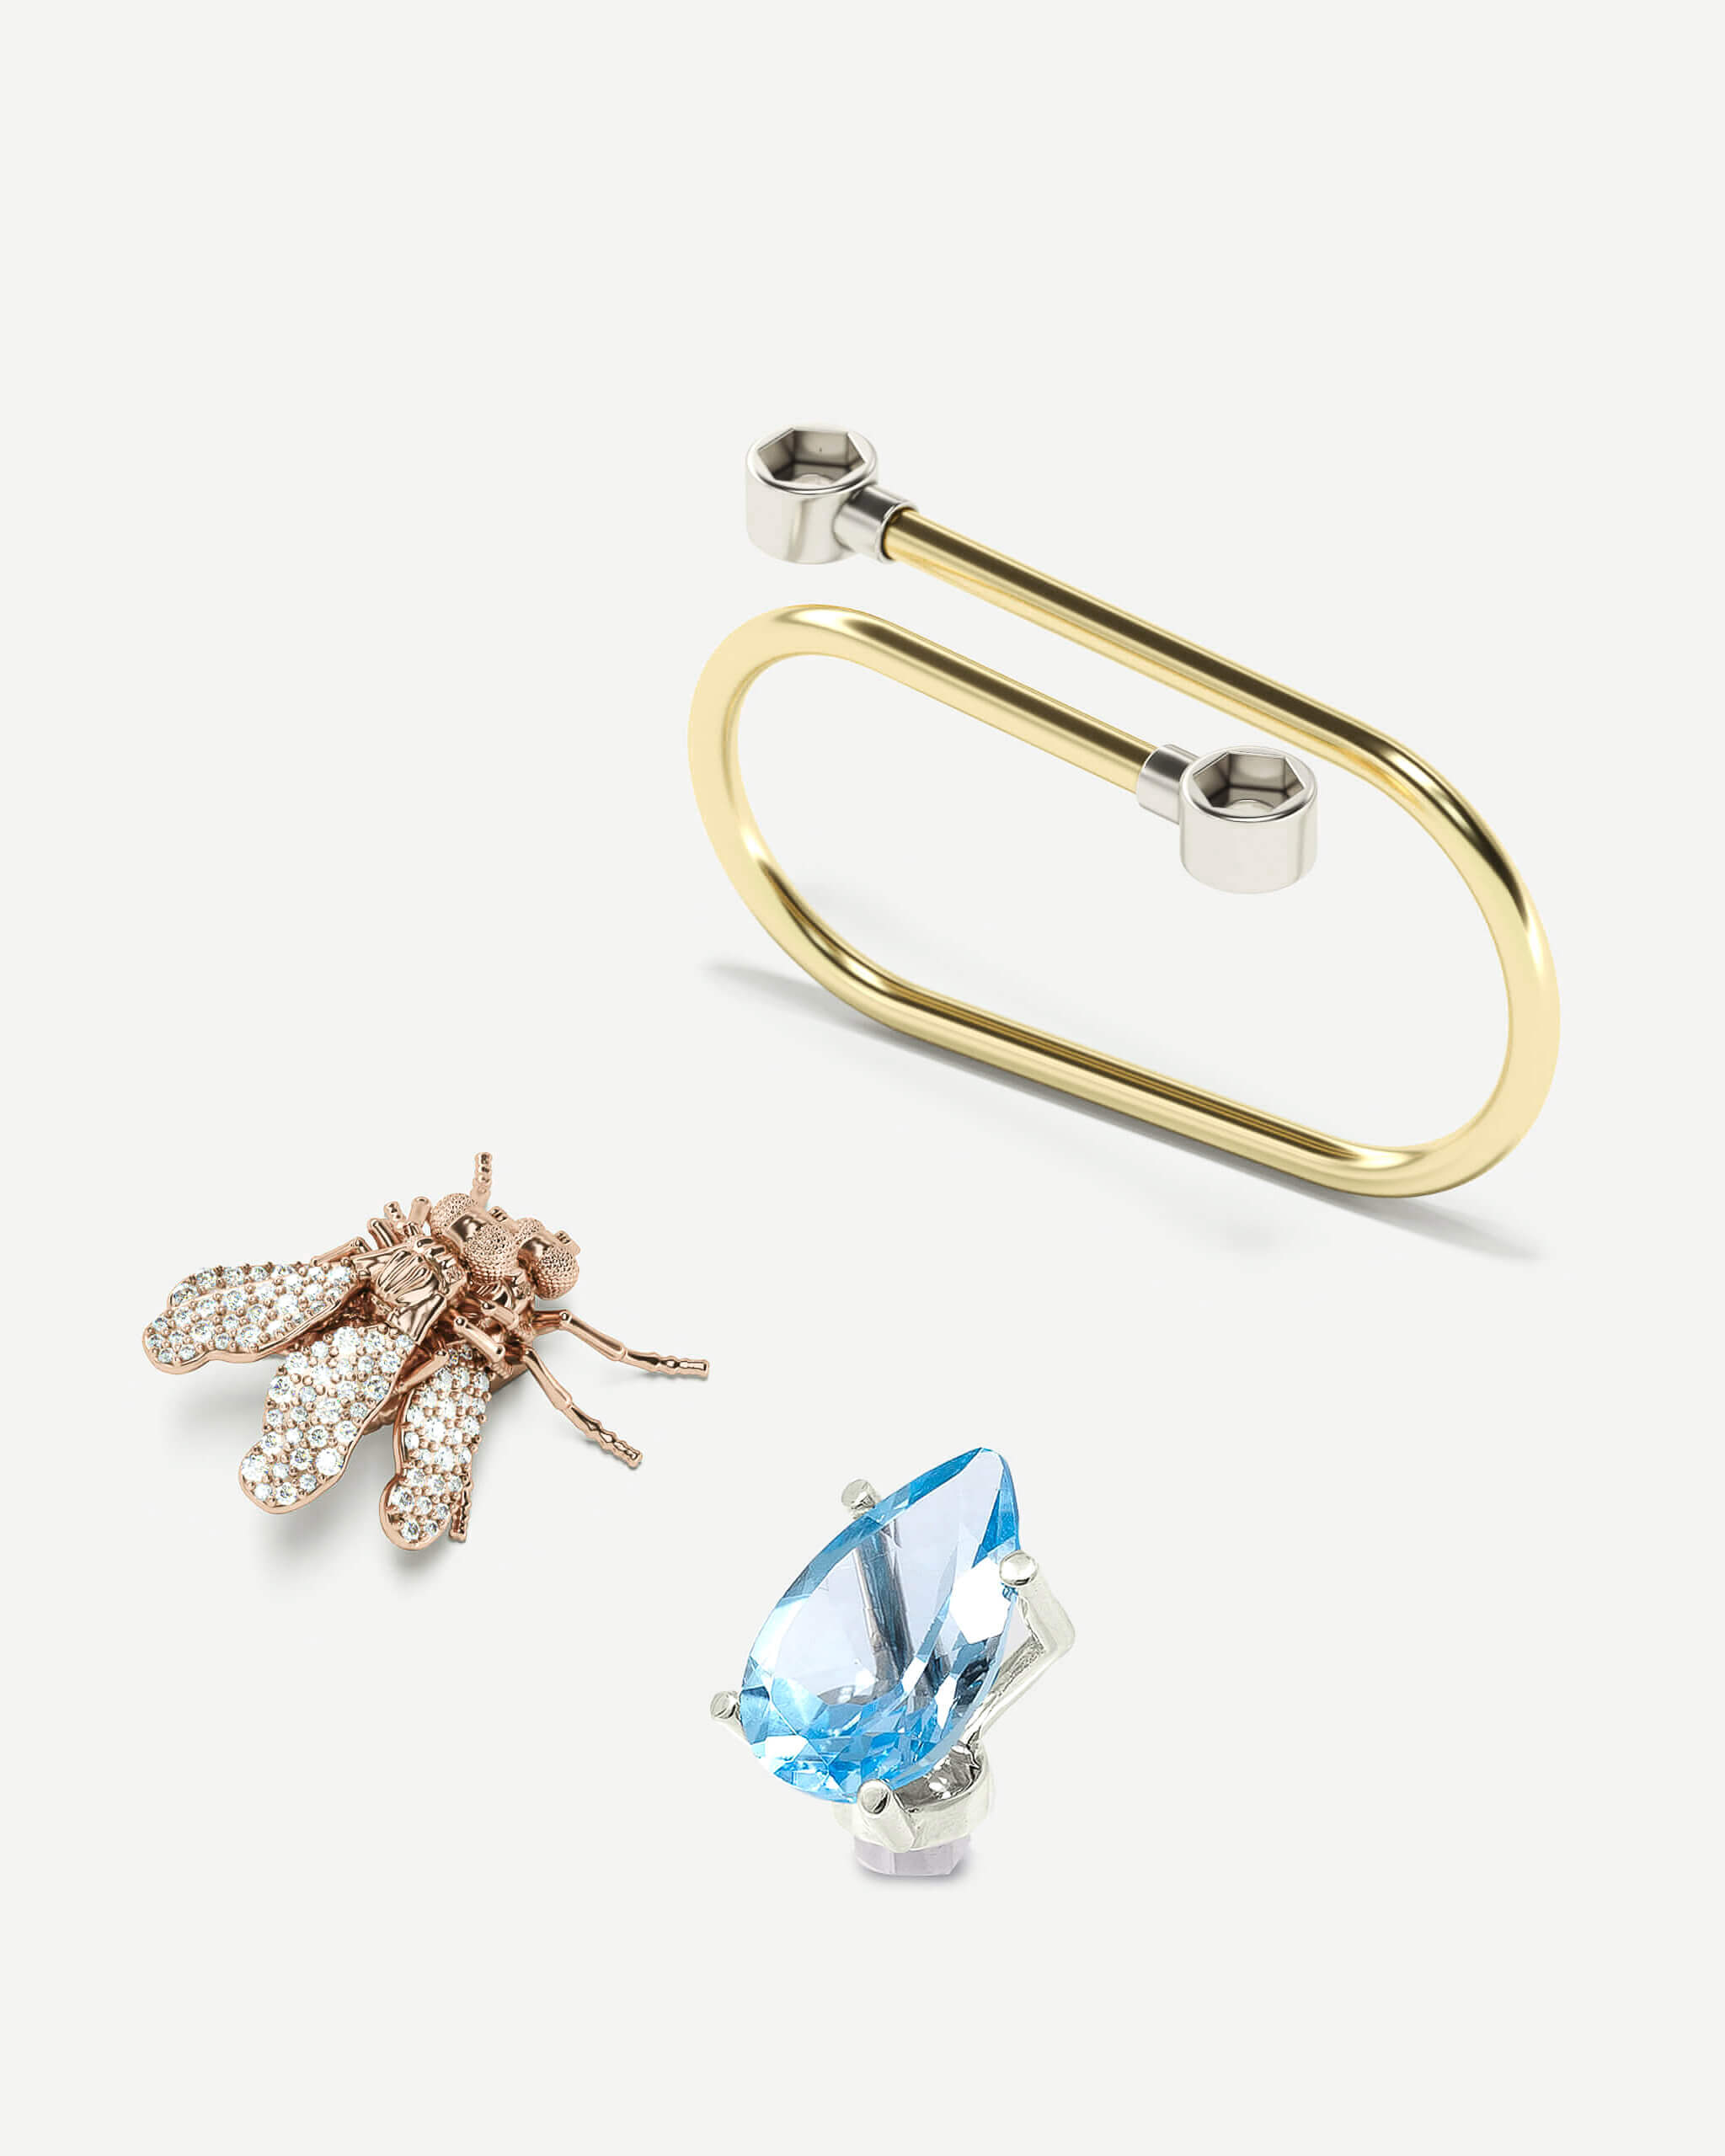 GOLDEN RING, INSECT & GEM COLLECTION